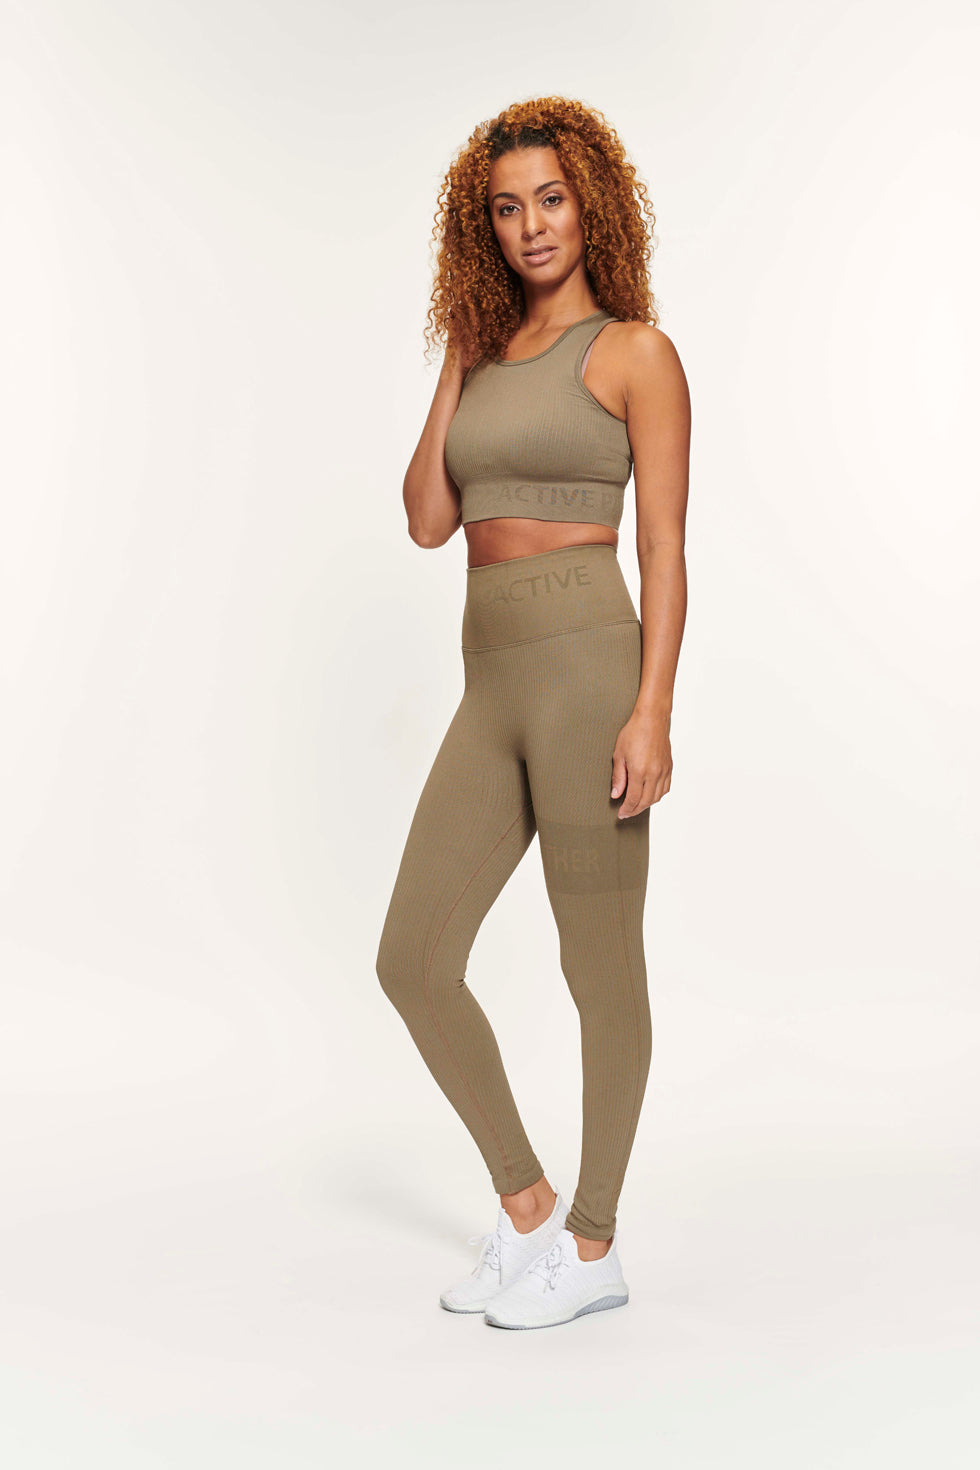 Active Panther - Taupe - GOGO Legging